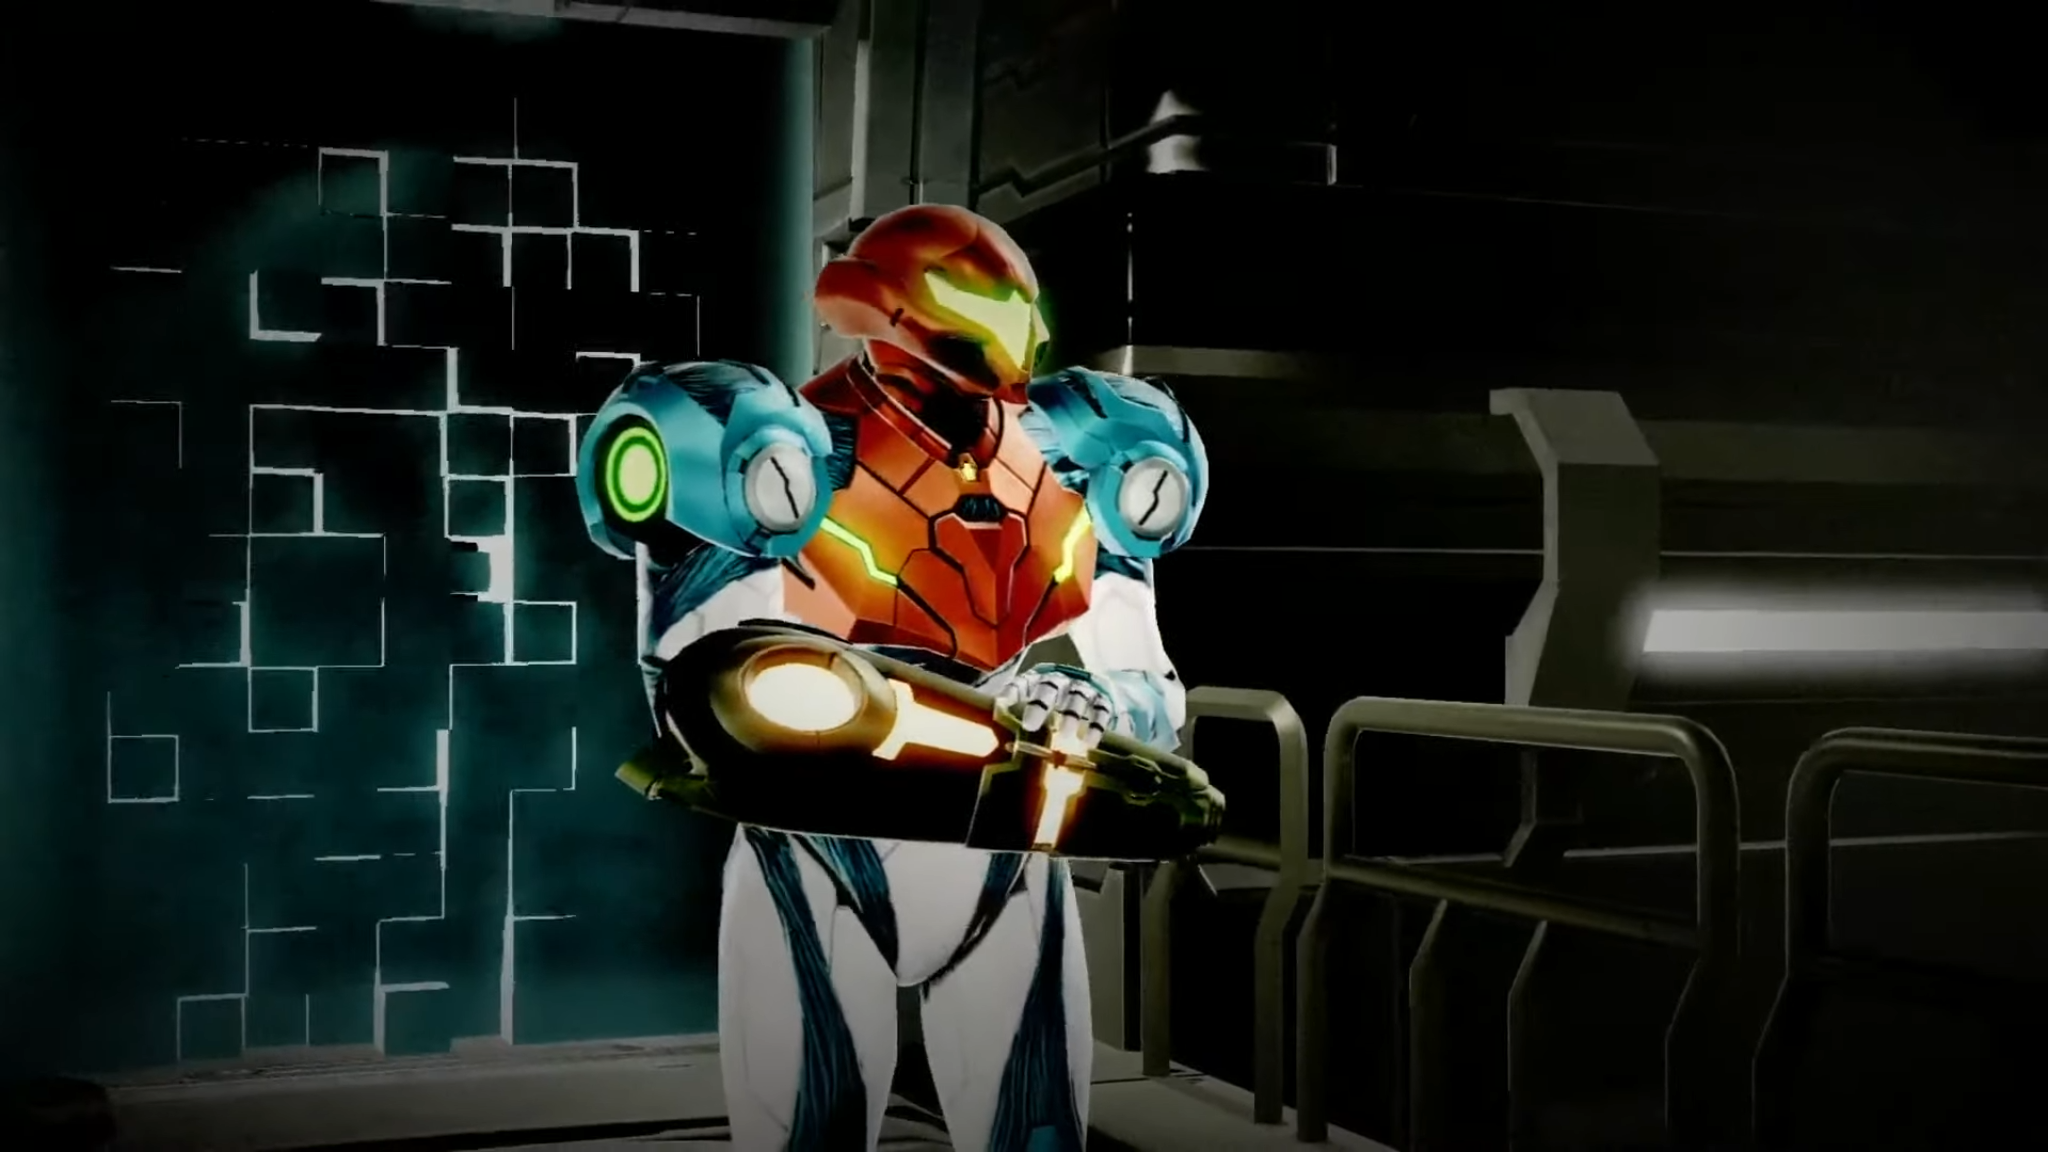 Metroid Dread release date, trailer, Special Edition and latest news. Tom's Guide